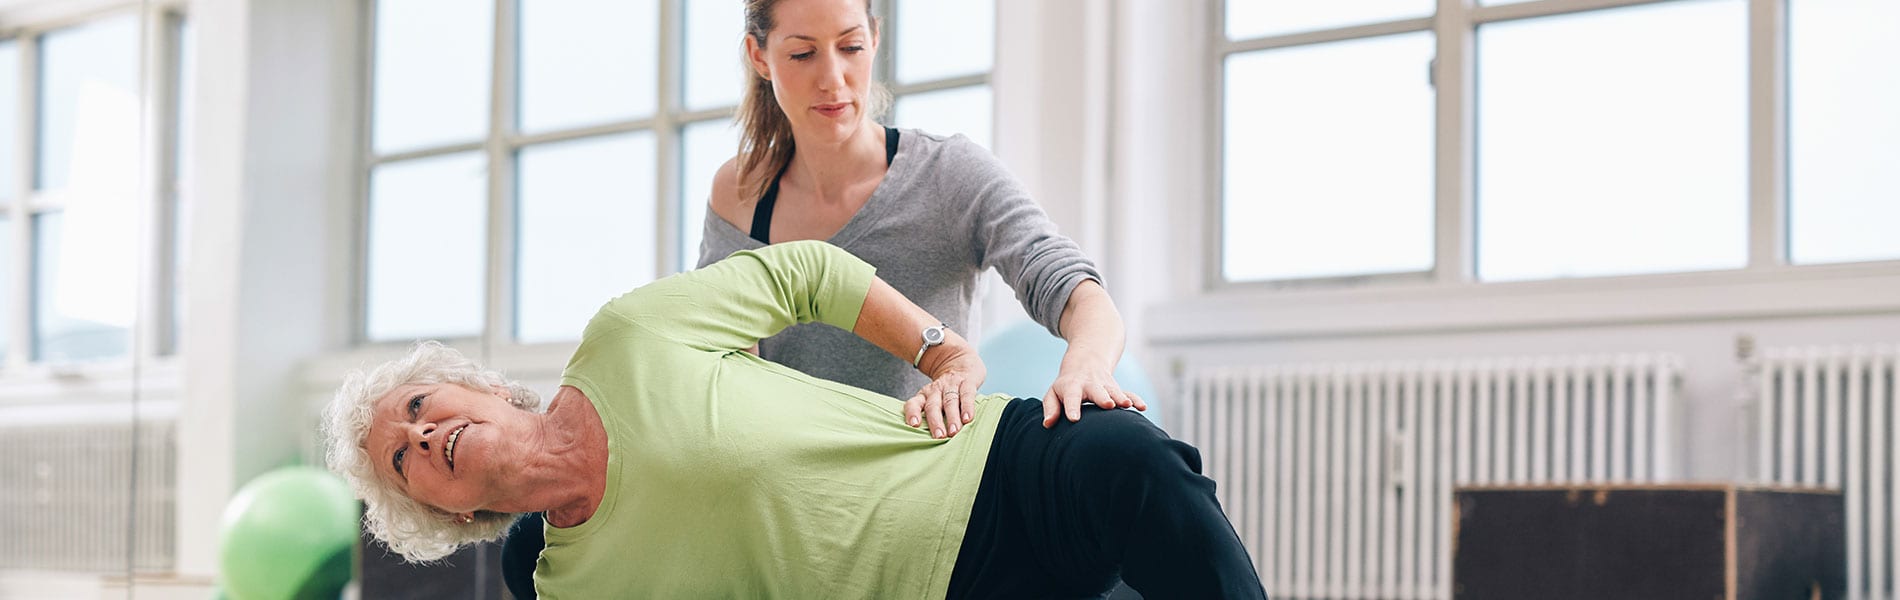 Treatment of Chronic Low Back Pain